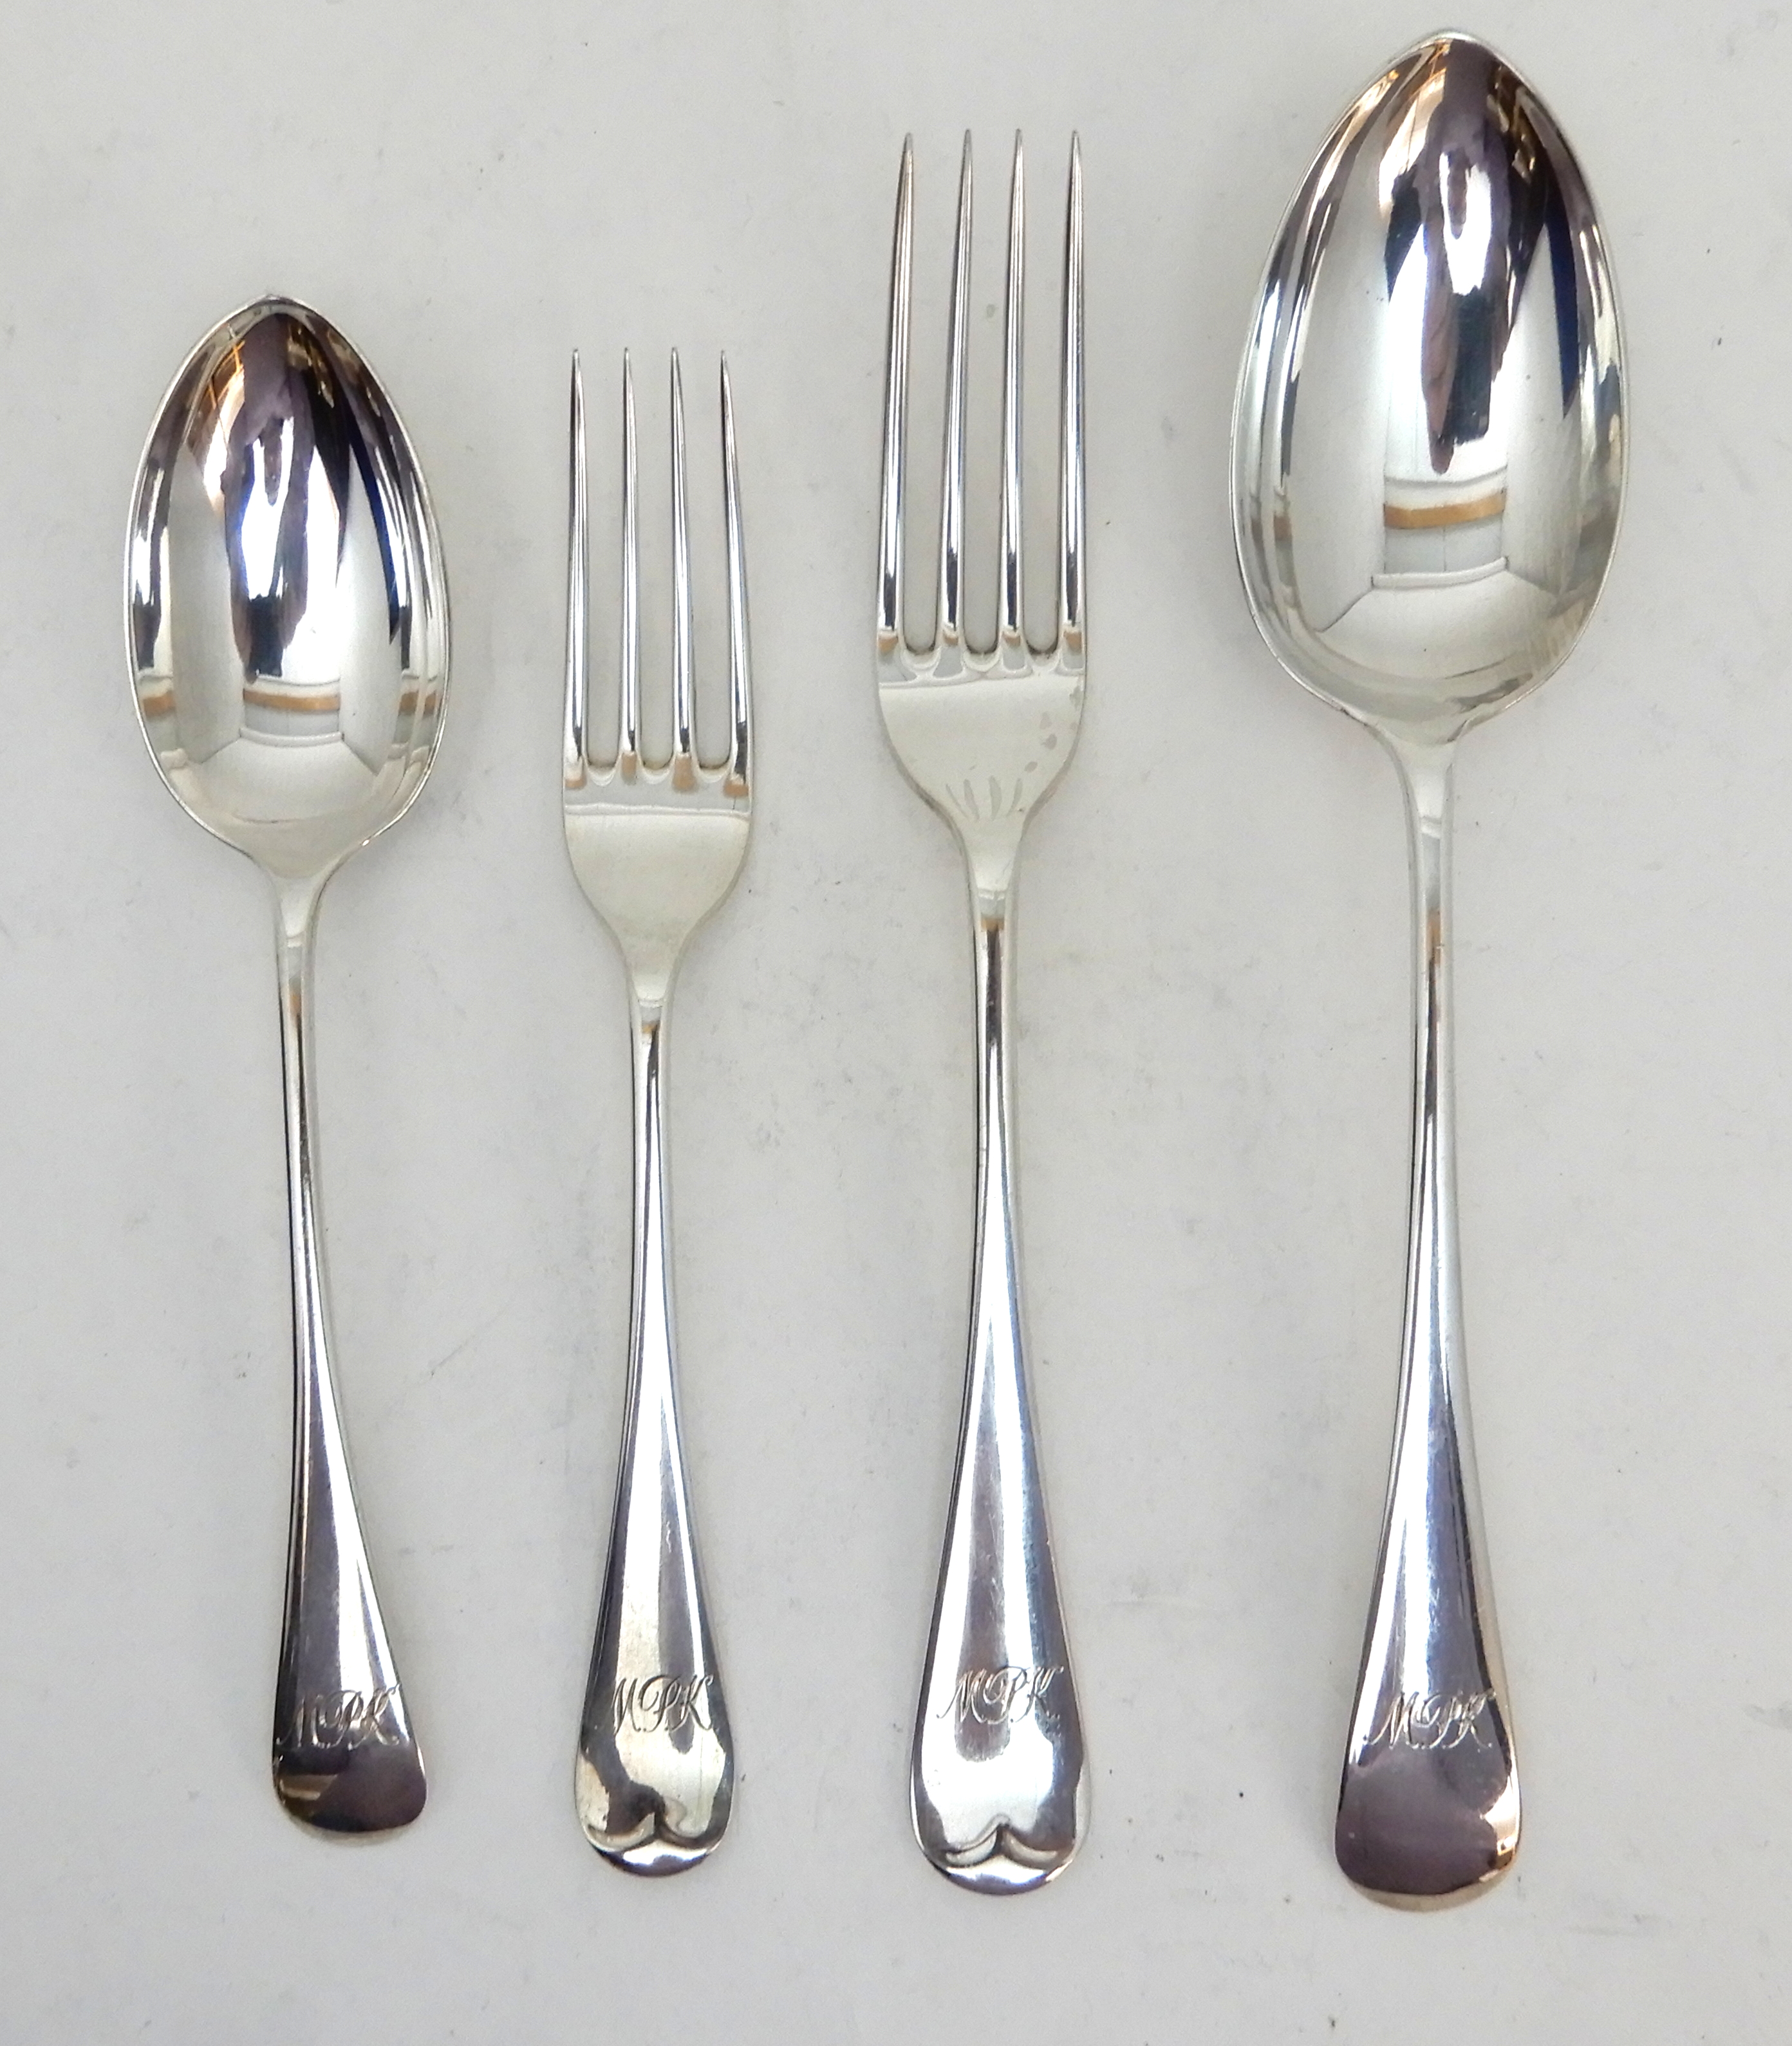 A CASED SET OF SILVER CUTLERY by James Dixon & Sons, Sheffield 1897, comprising for tablespoons, six - Image 4 of 6